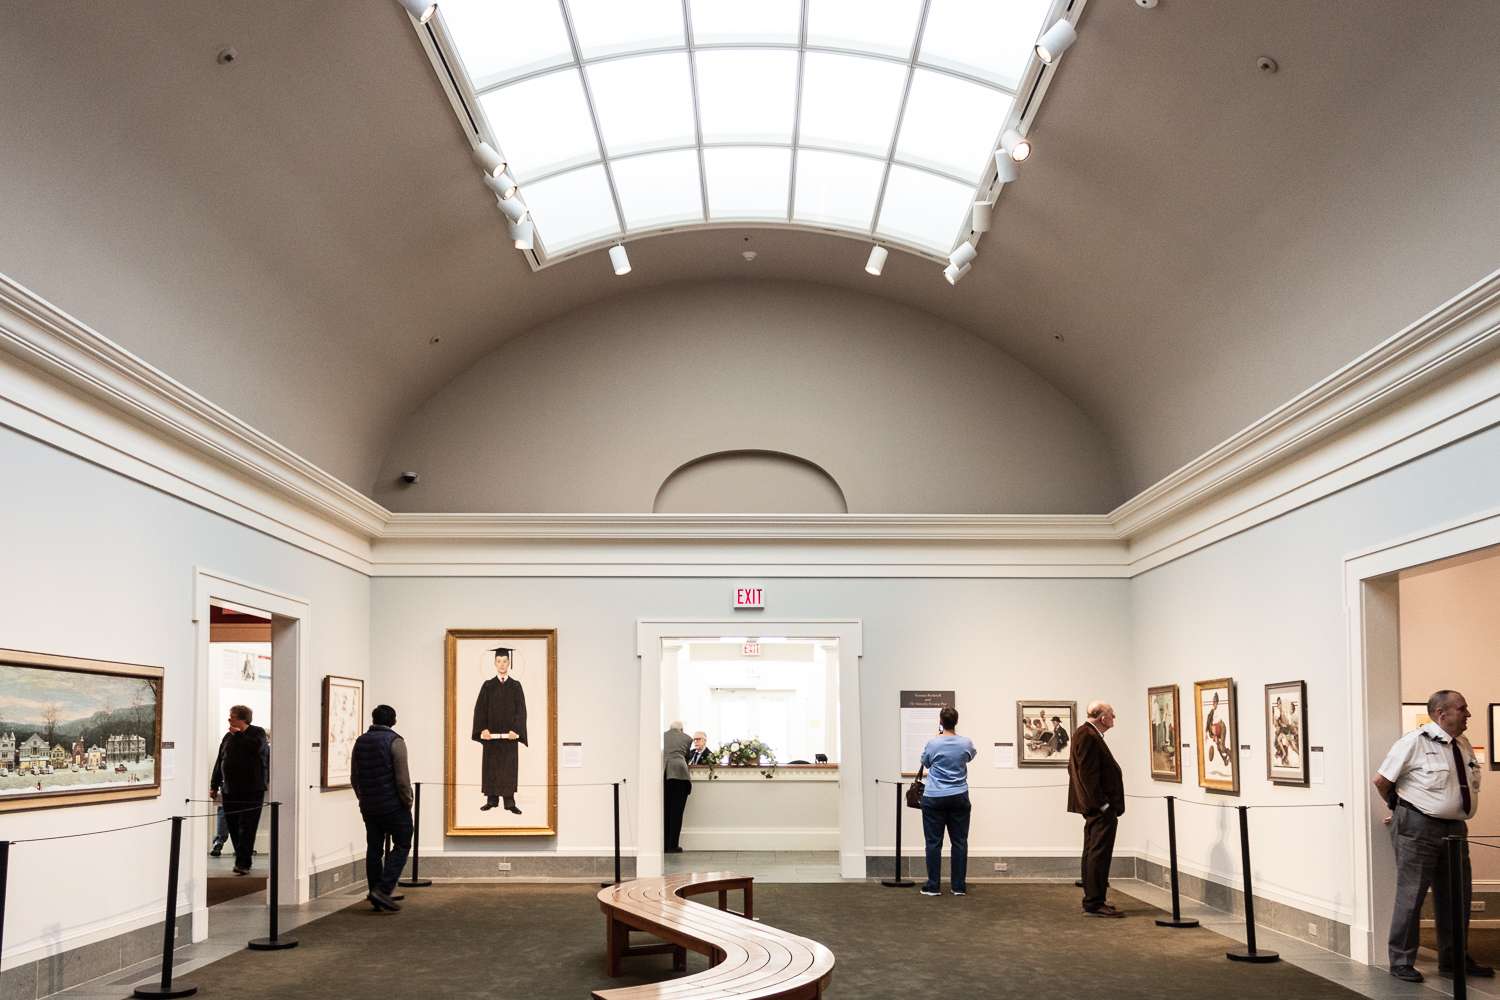 10 Reasons To Love the Norman Rockwell Museum in Stockbridge Mass.